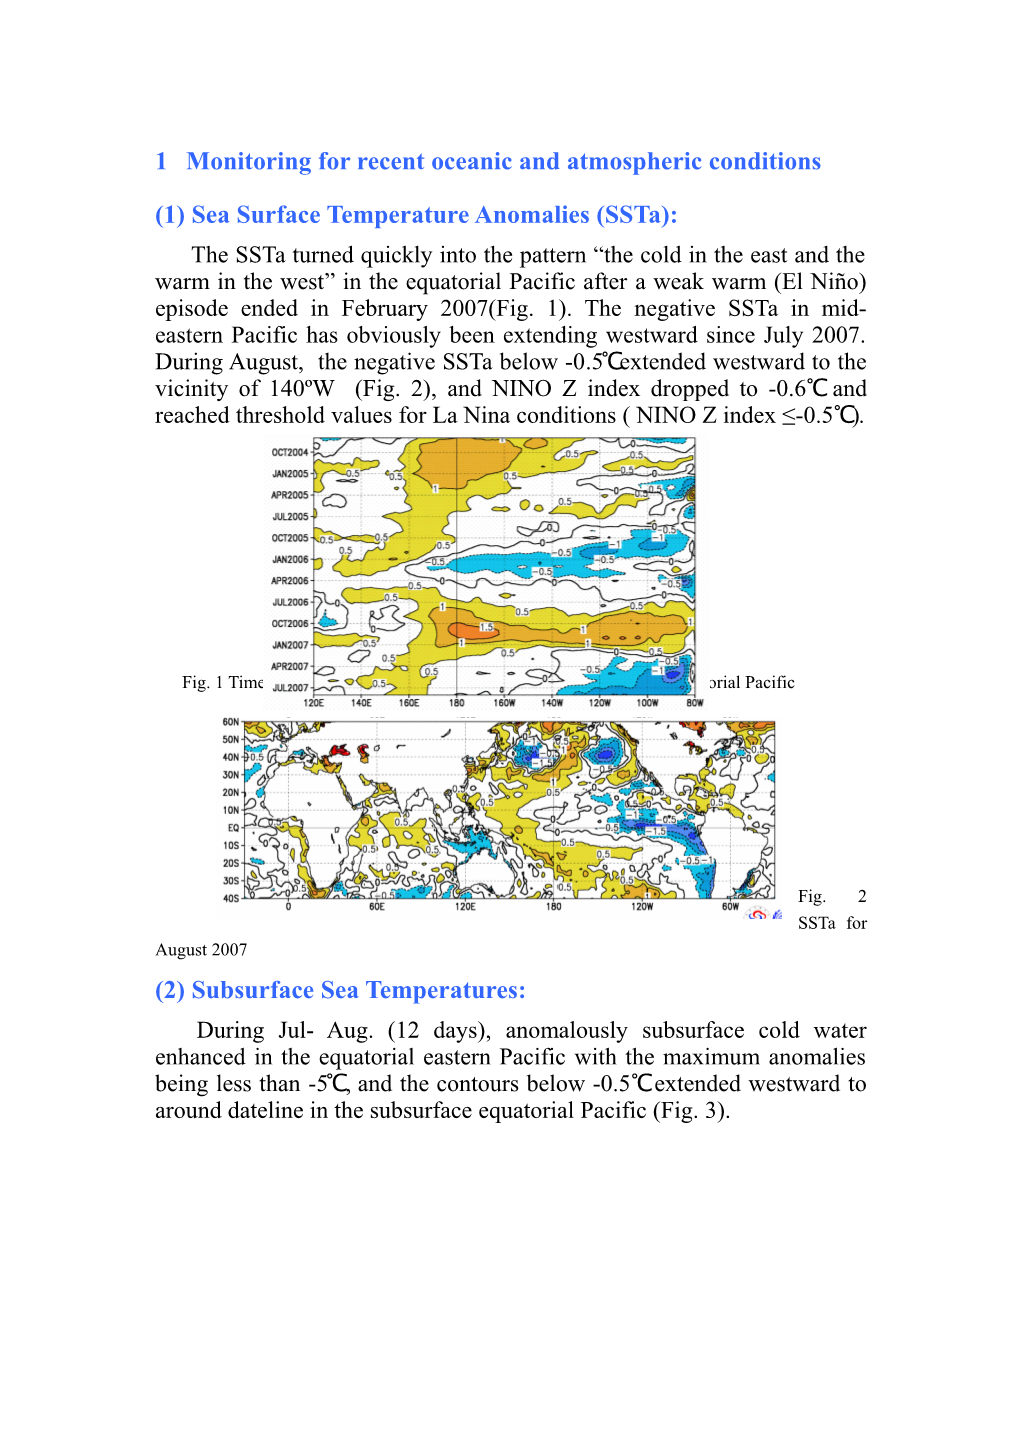 1Monitoring for Recent Oceanic and Atmospheric Conditions